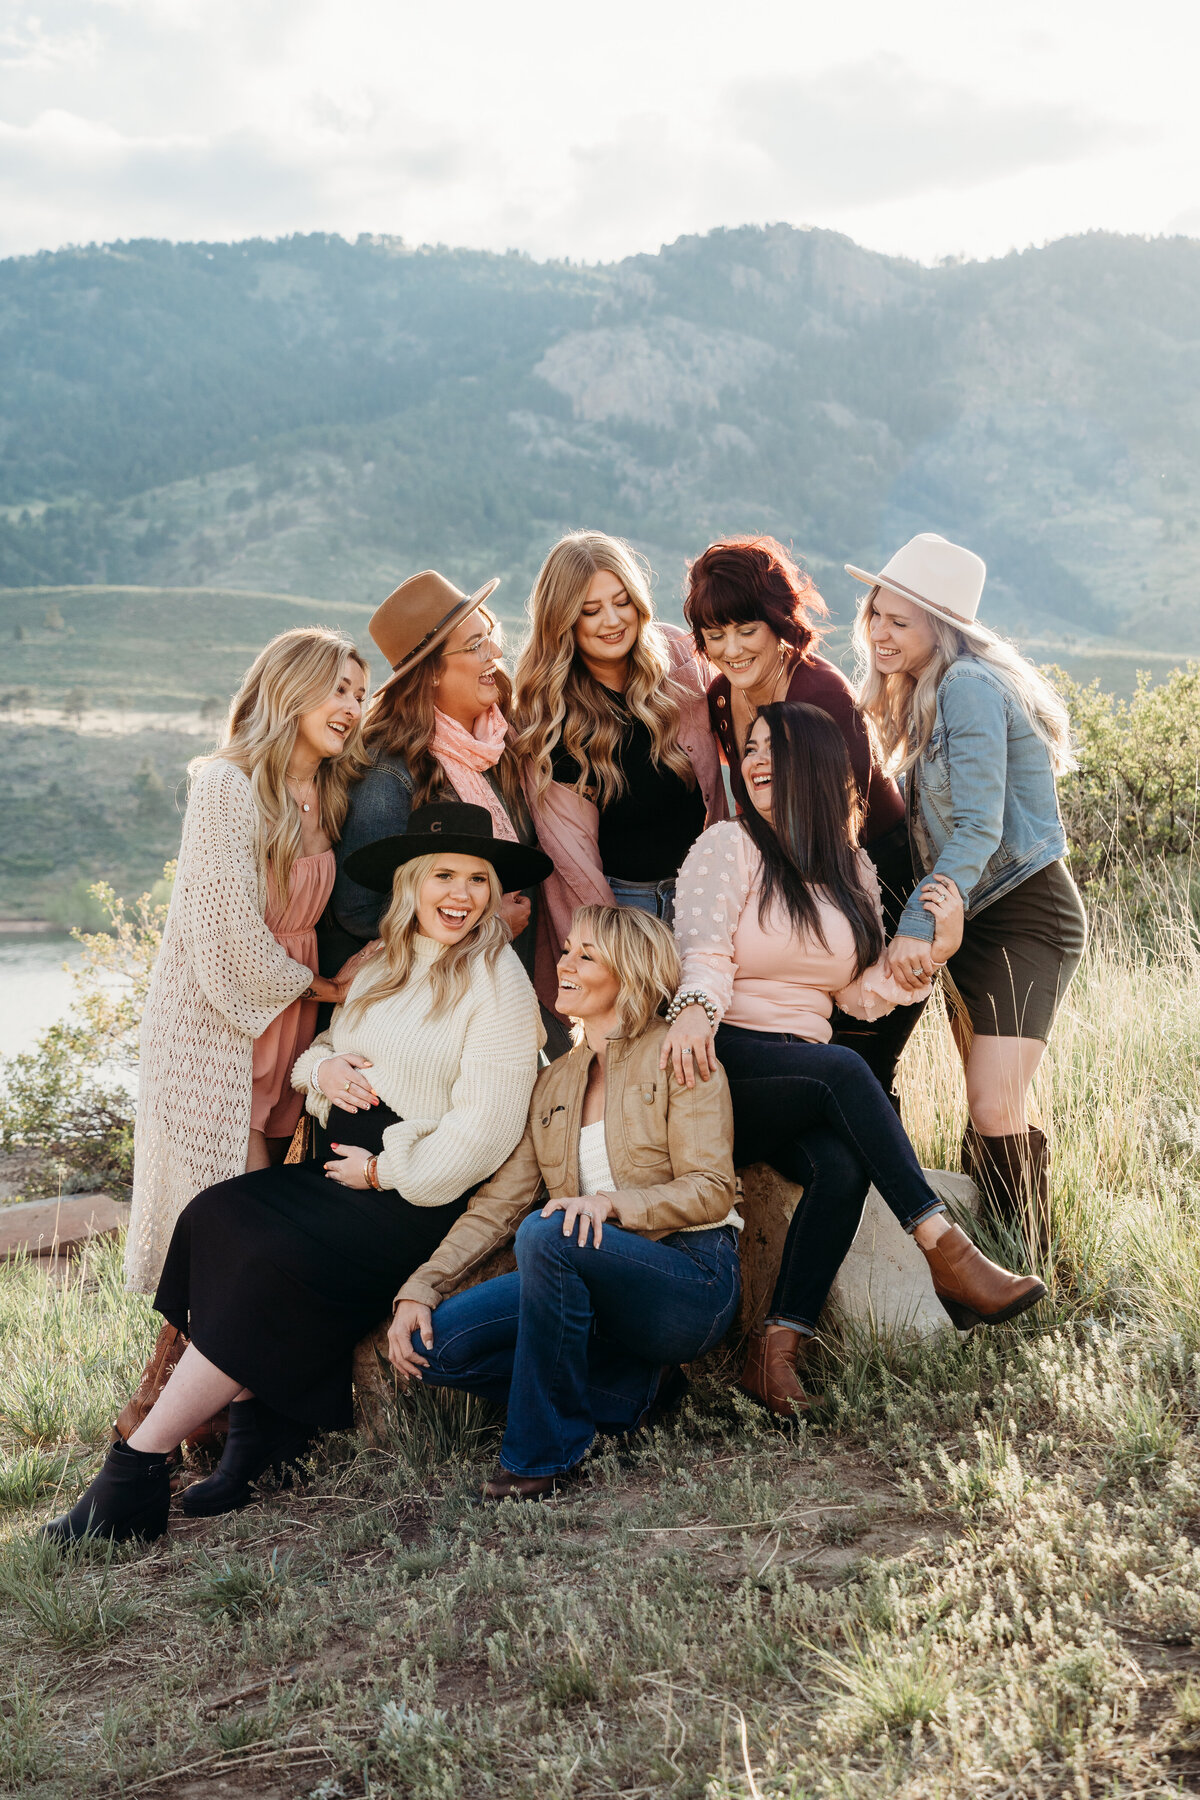 Hair salon branding shoot for Wild and Whimsy at Horsetooth